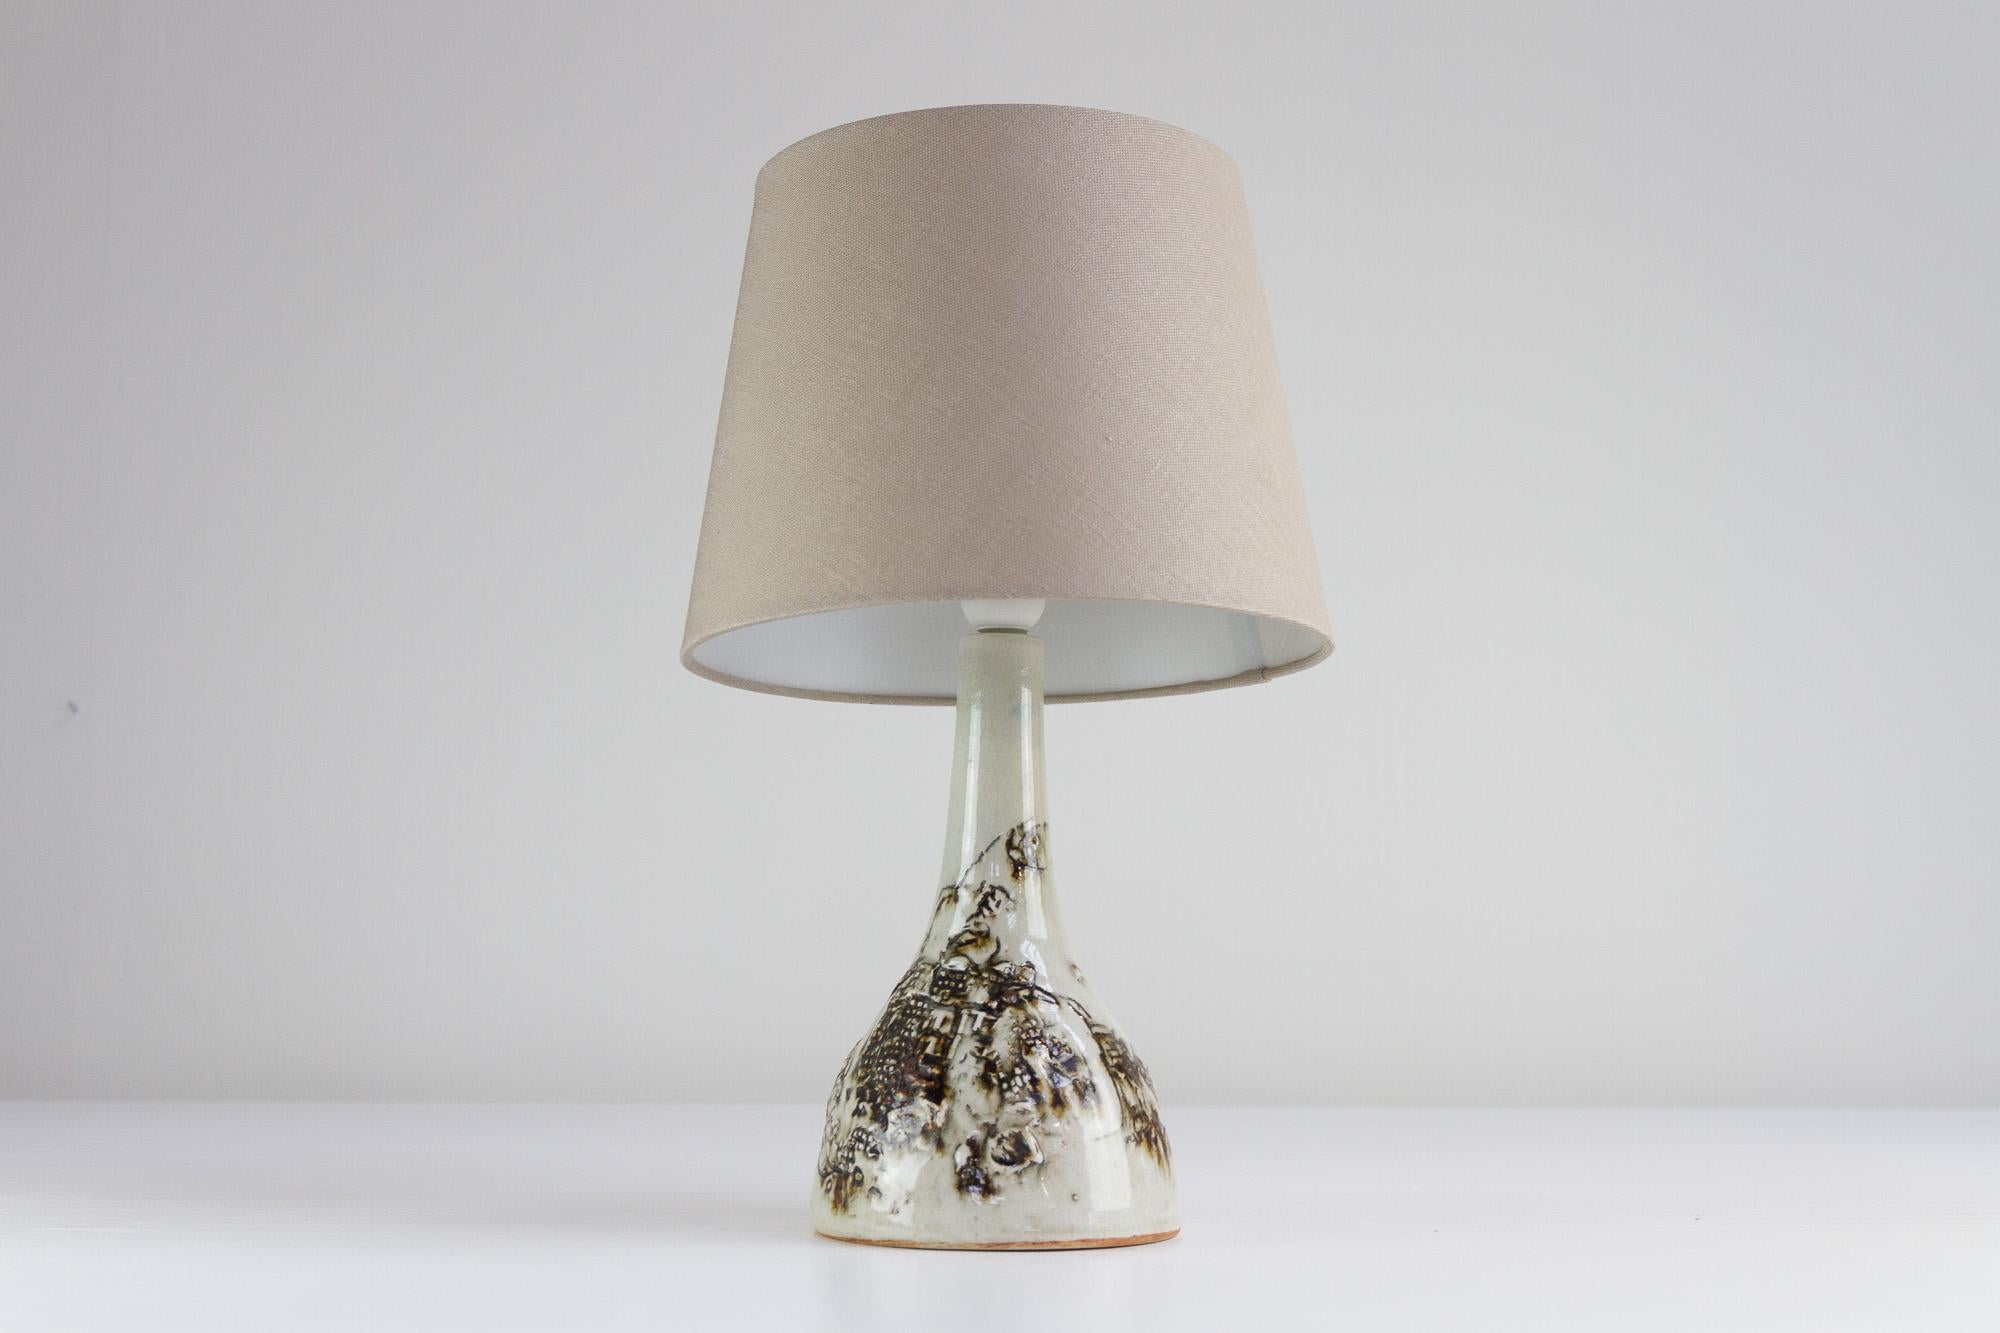 Vintage Danish Brutalist Ceramic Table Lamp by Conny Walther, 1960s.
Danish Mid-century modern table lamp in stoneware designed by Danish ceramist Conny Walther. The lamp base has abstract decorations in tactile brown colors. 
New lamp shade